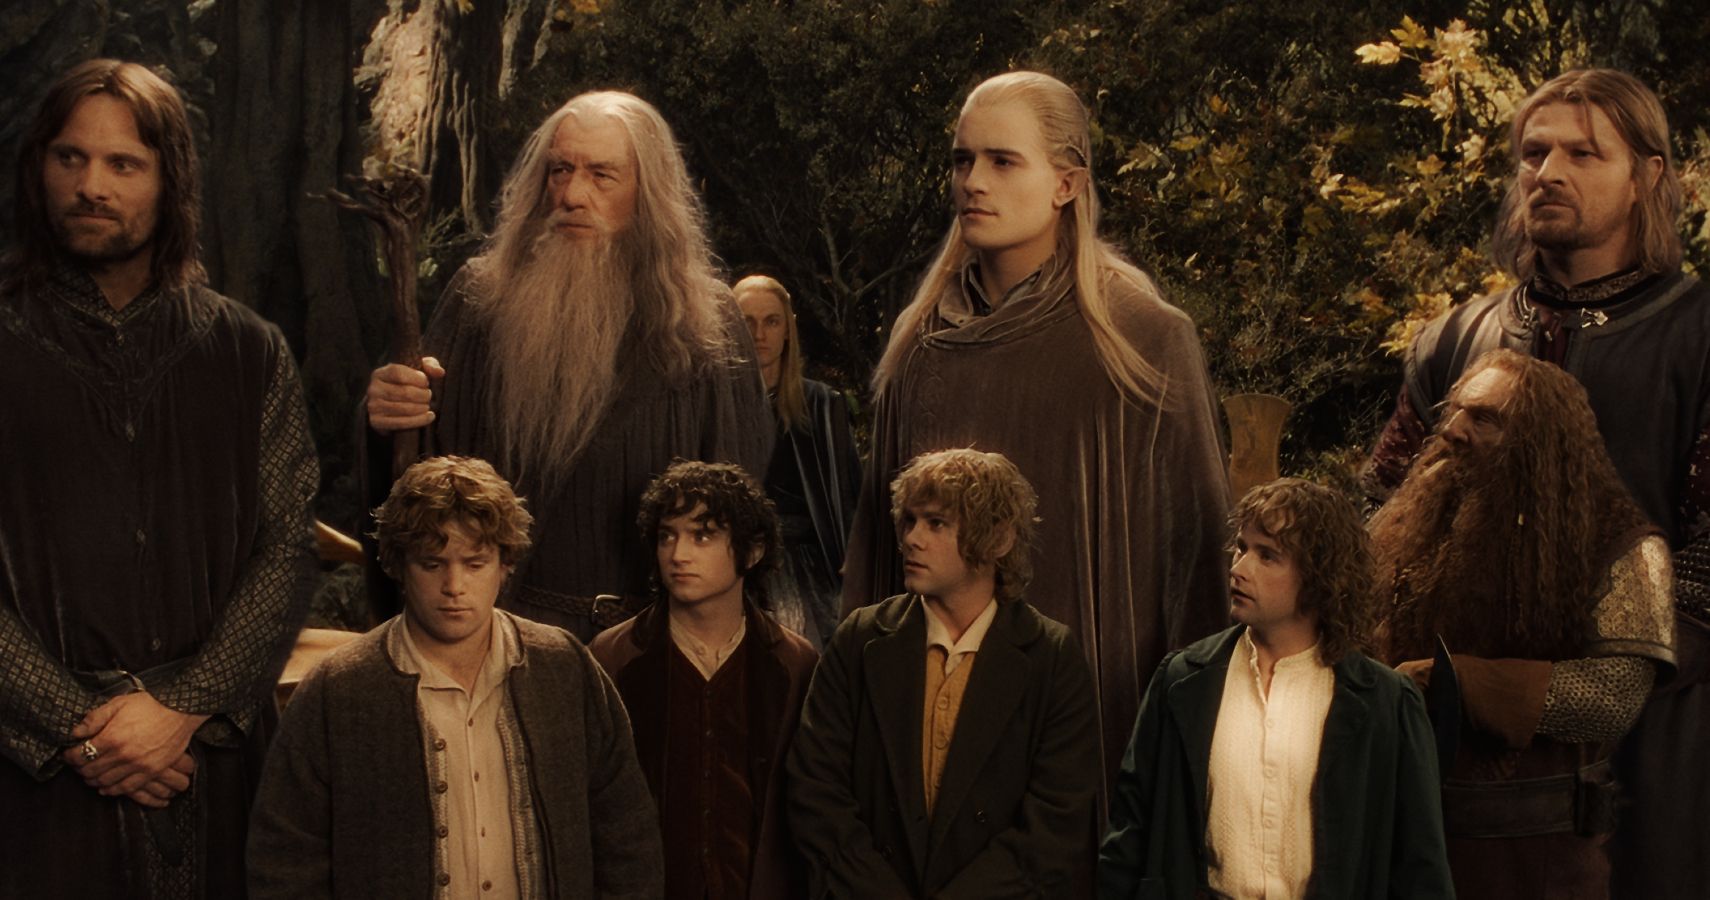 Characters making up the fellowship from The Lord of the Rings